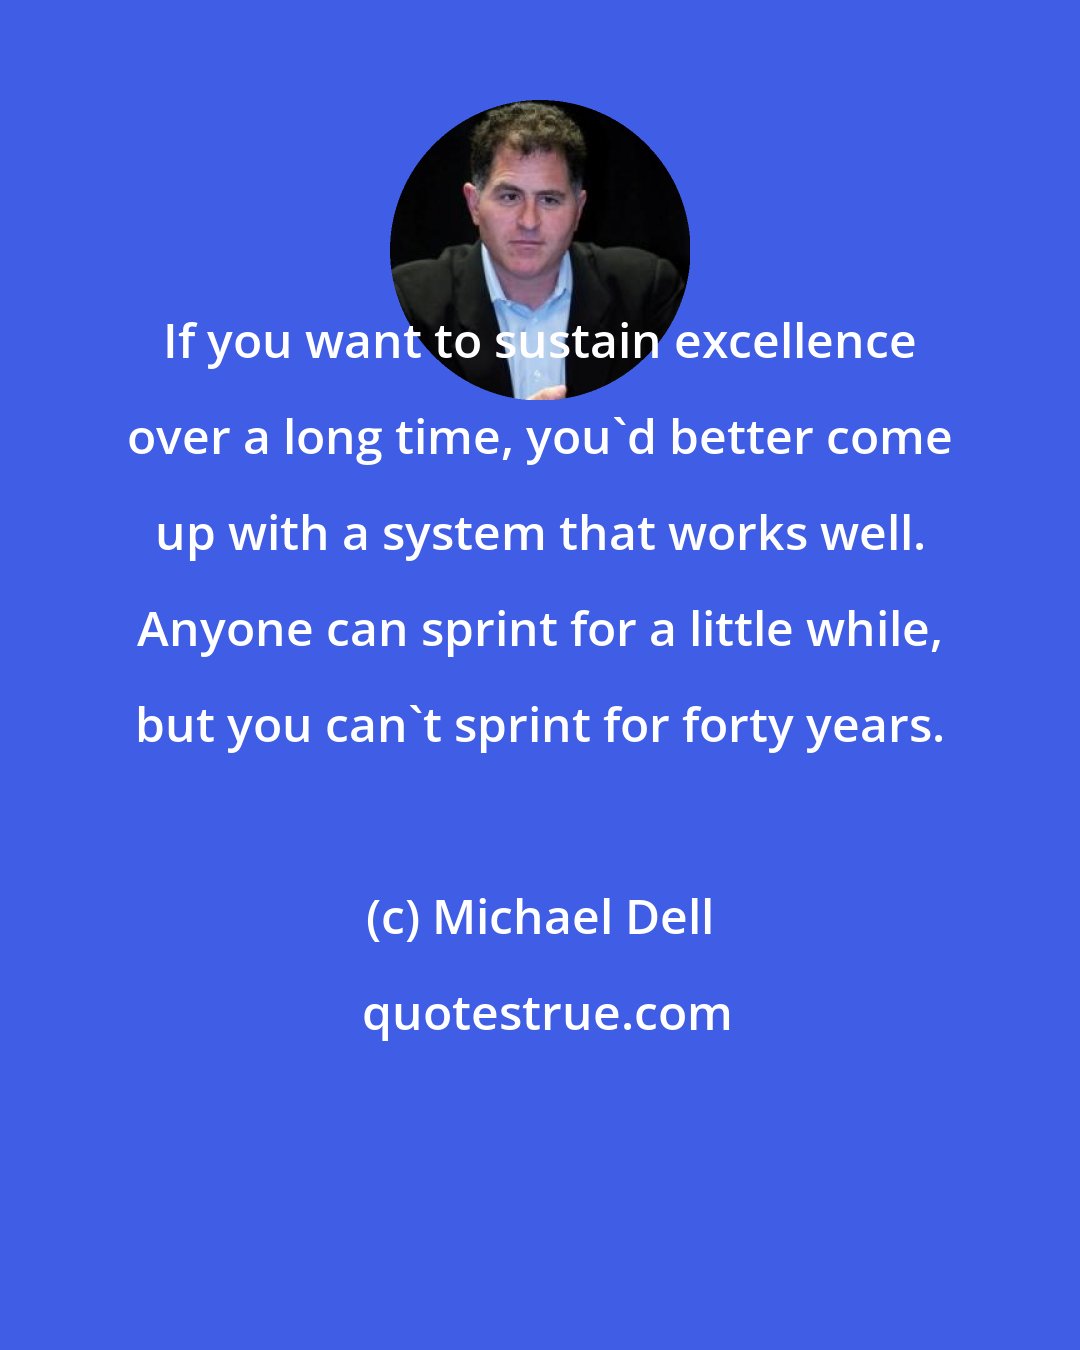 Michael Dell: If you want to sustain excellence over a long time, you'd better come up with a system that works well. Anyone can sprint for a little while, but you can't sprint for forty years.